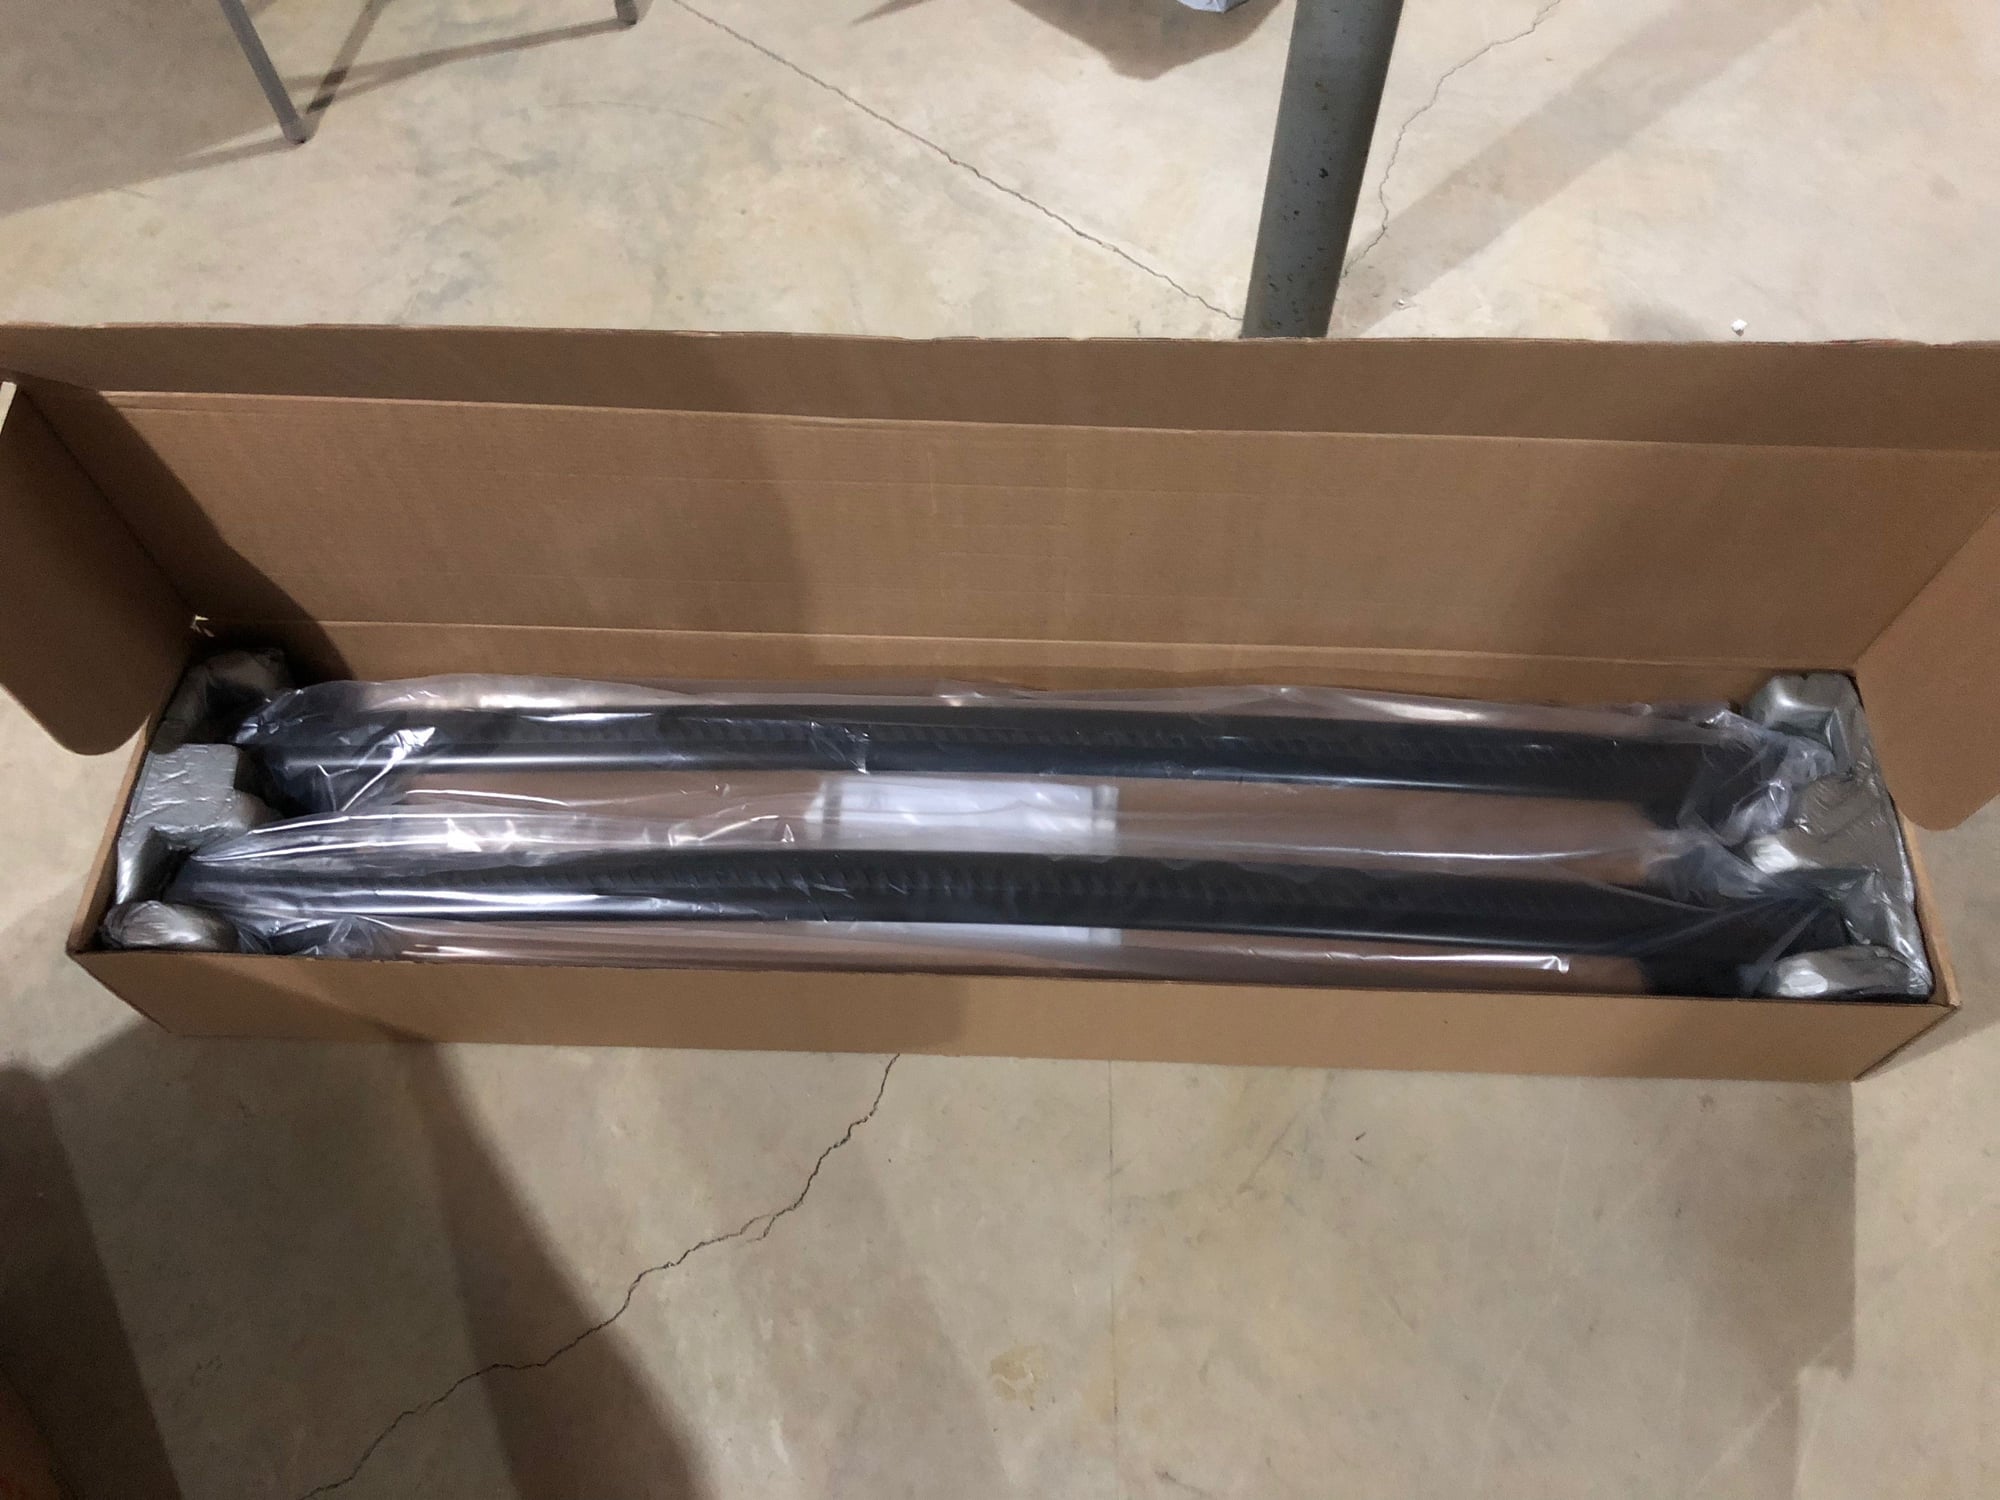 Miscellaneous - EXPIRED FS: 2019 RDX OEM Cross Bars, OEM Floor Mats, stock Rear Panel Protector - New - 2019 Acura RDX - Lancaster, PA 17602, United States